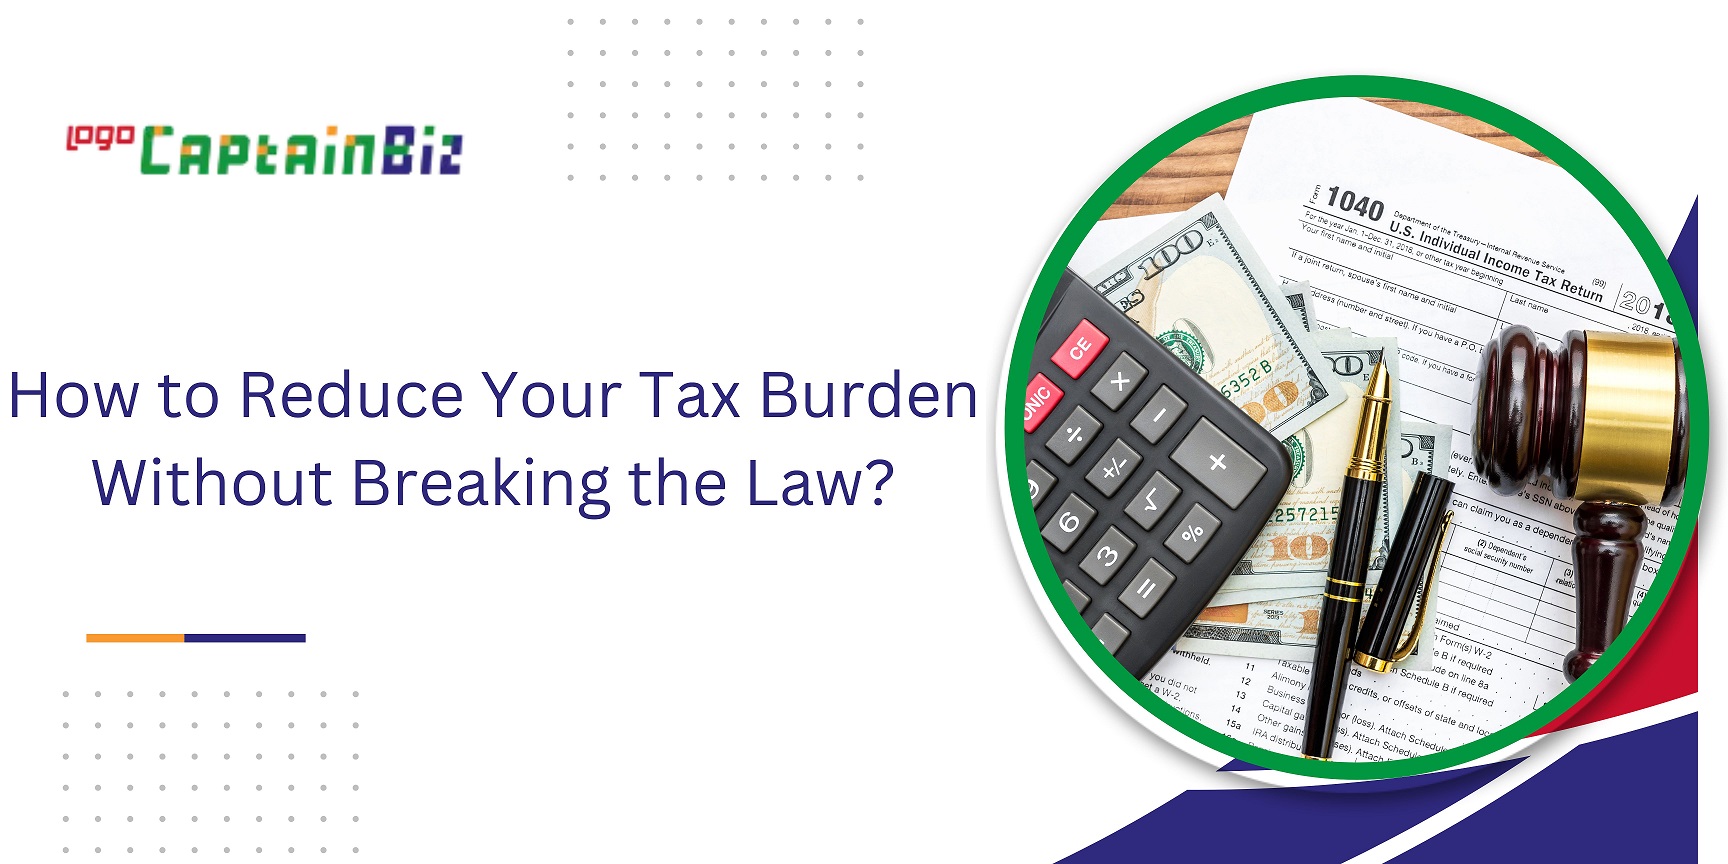 CaptainBiz: How to Reduce Your Tax Burden Without Breaking the Law